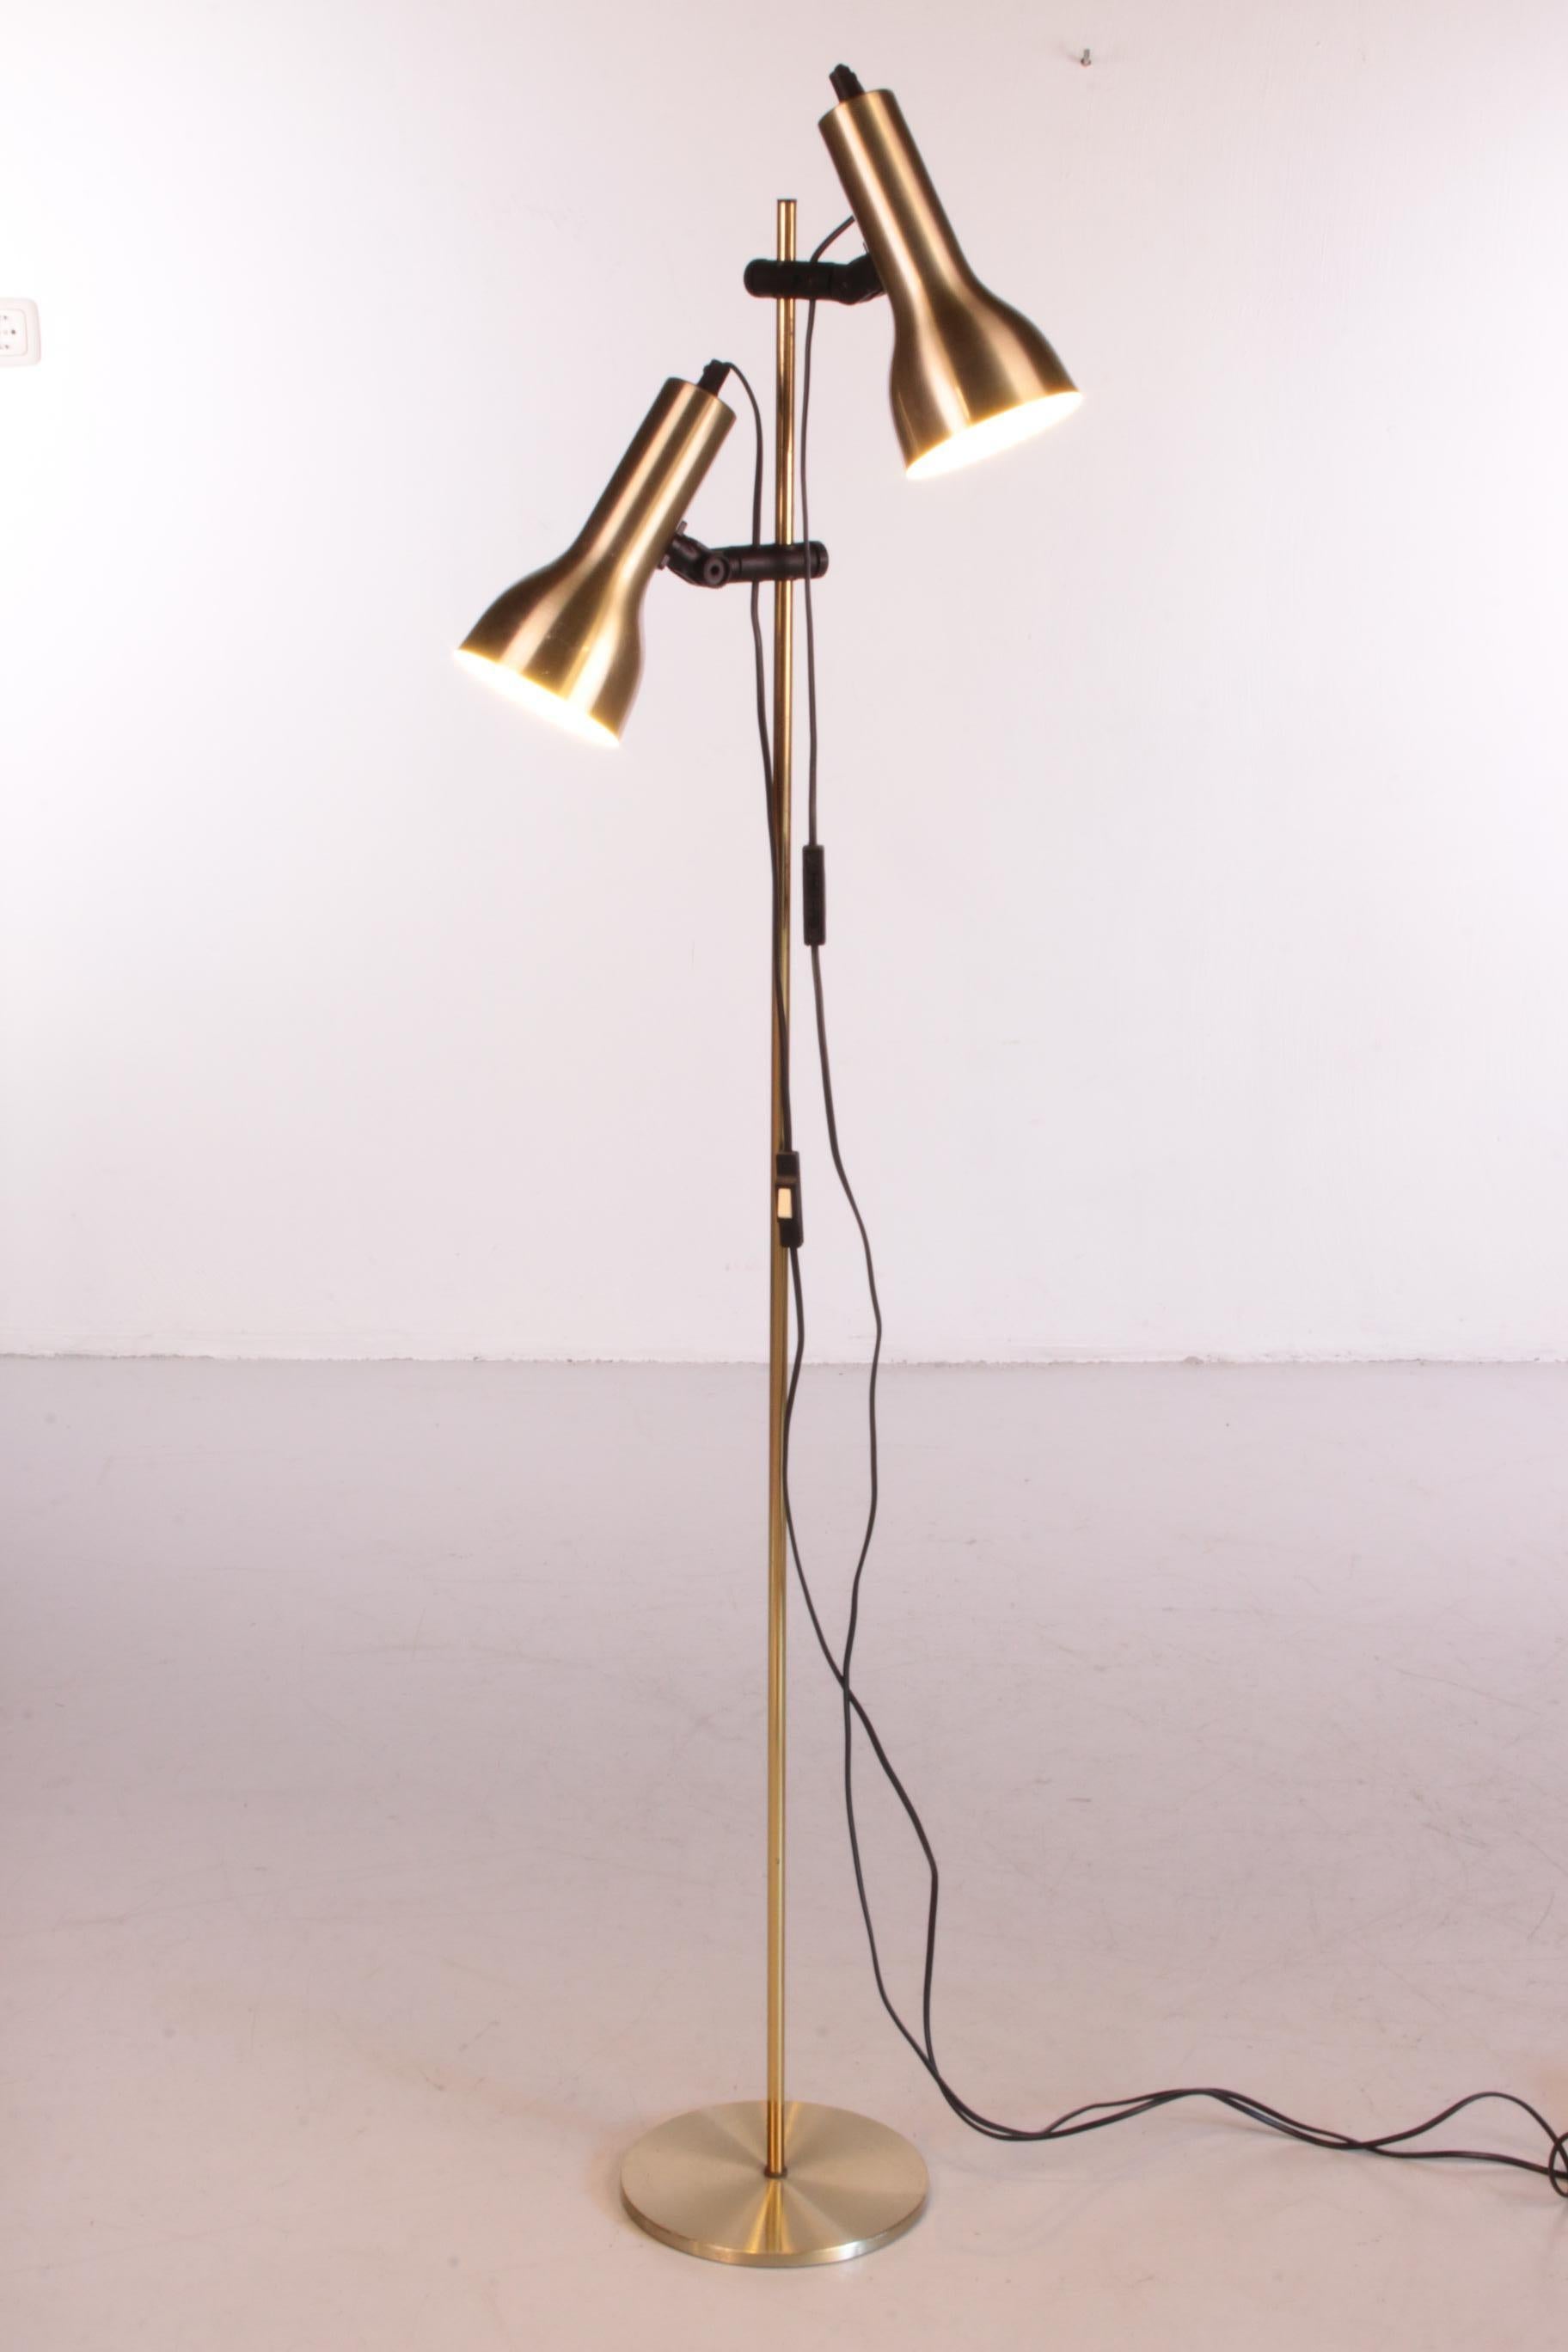 An authentic vintage modern floor lamp from the 1960s. The lamp most likely produced by the Danish brand Dansa, which is mainly known for their lamps.

This lamp has a long elegant neck with two lamps attached. These lamps are adjustable so that